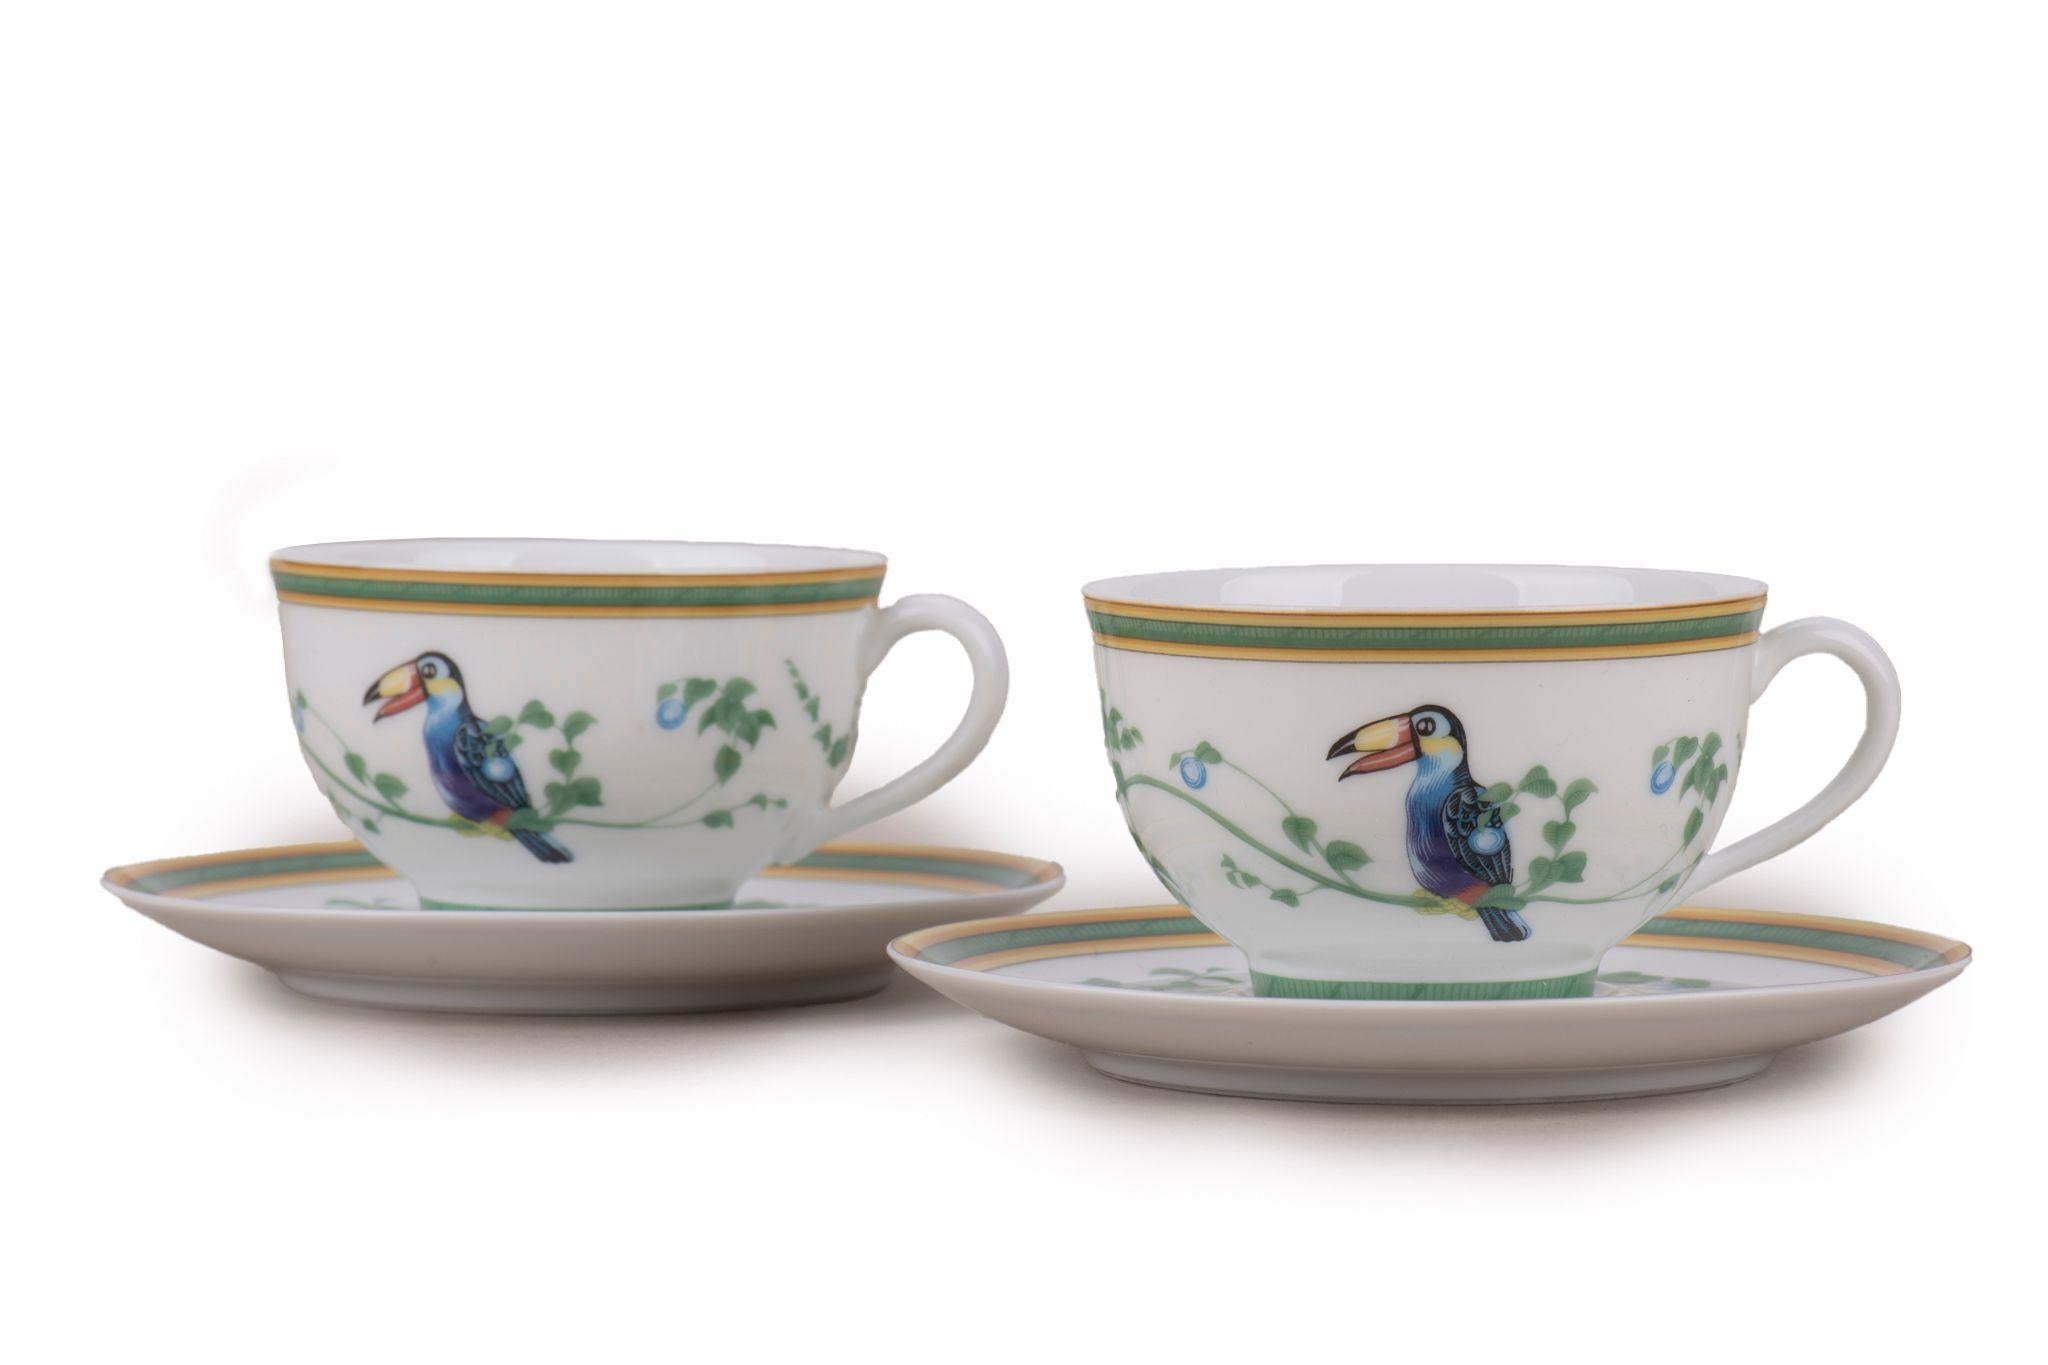 Hermès Toucans Teacups & Saucers, S/2 In Excellent Condition For Sale In West Hollywood, CA